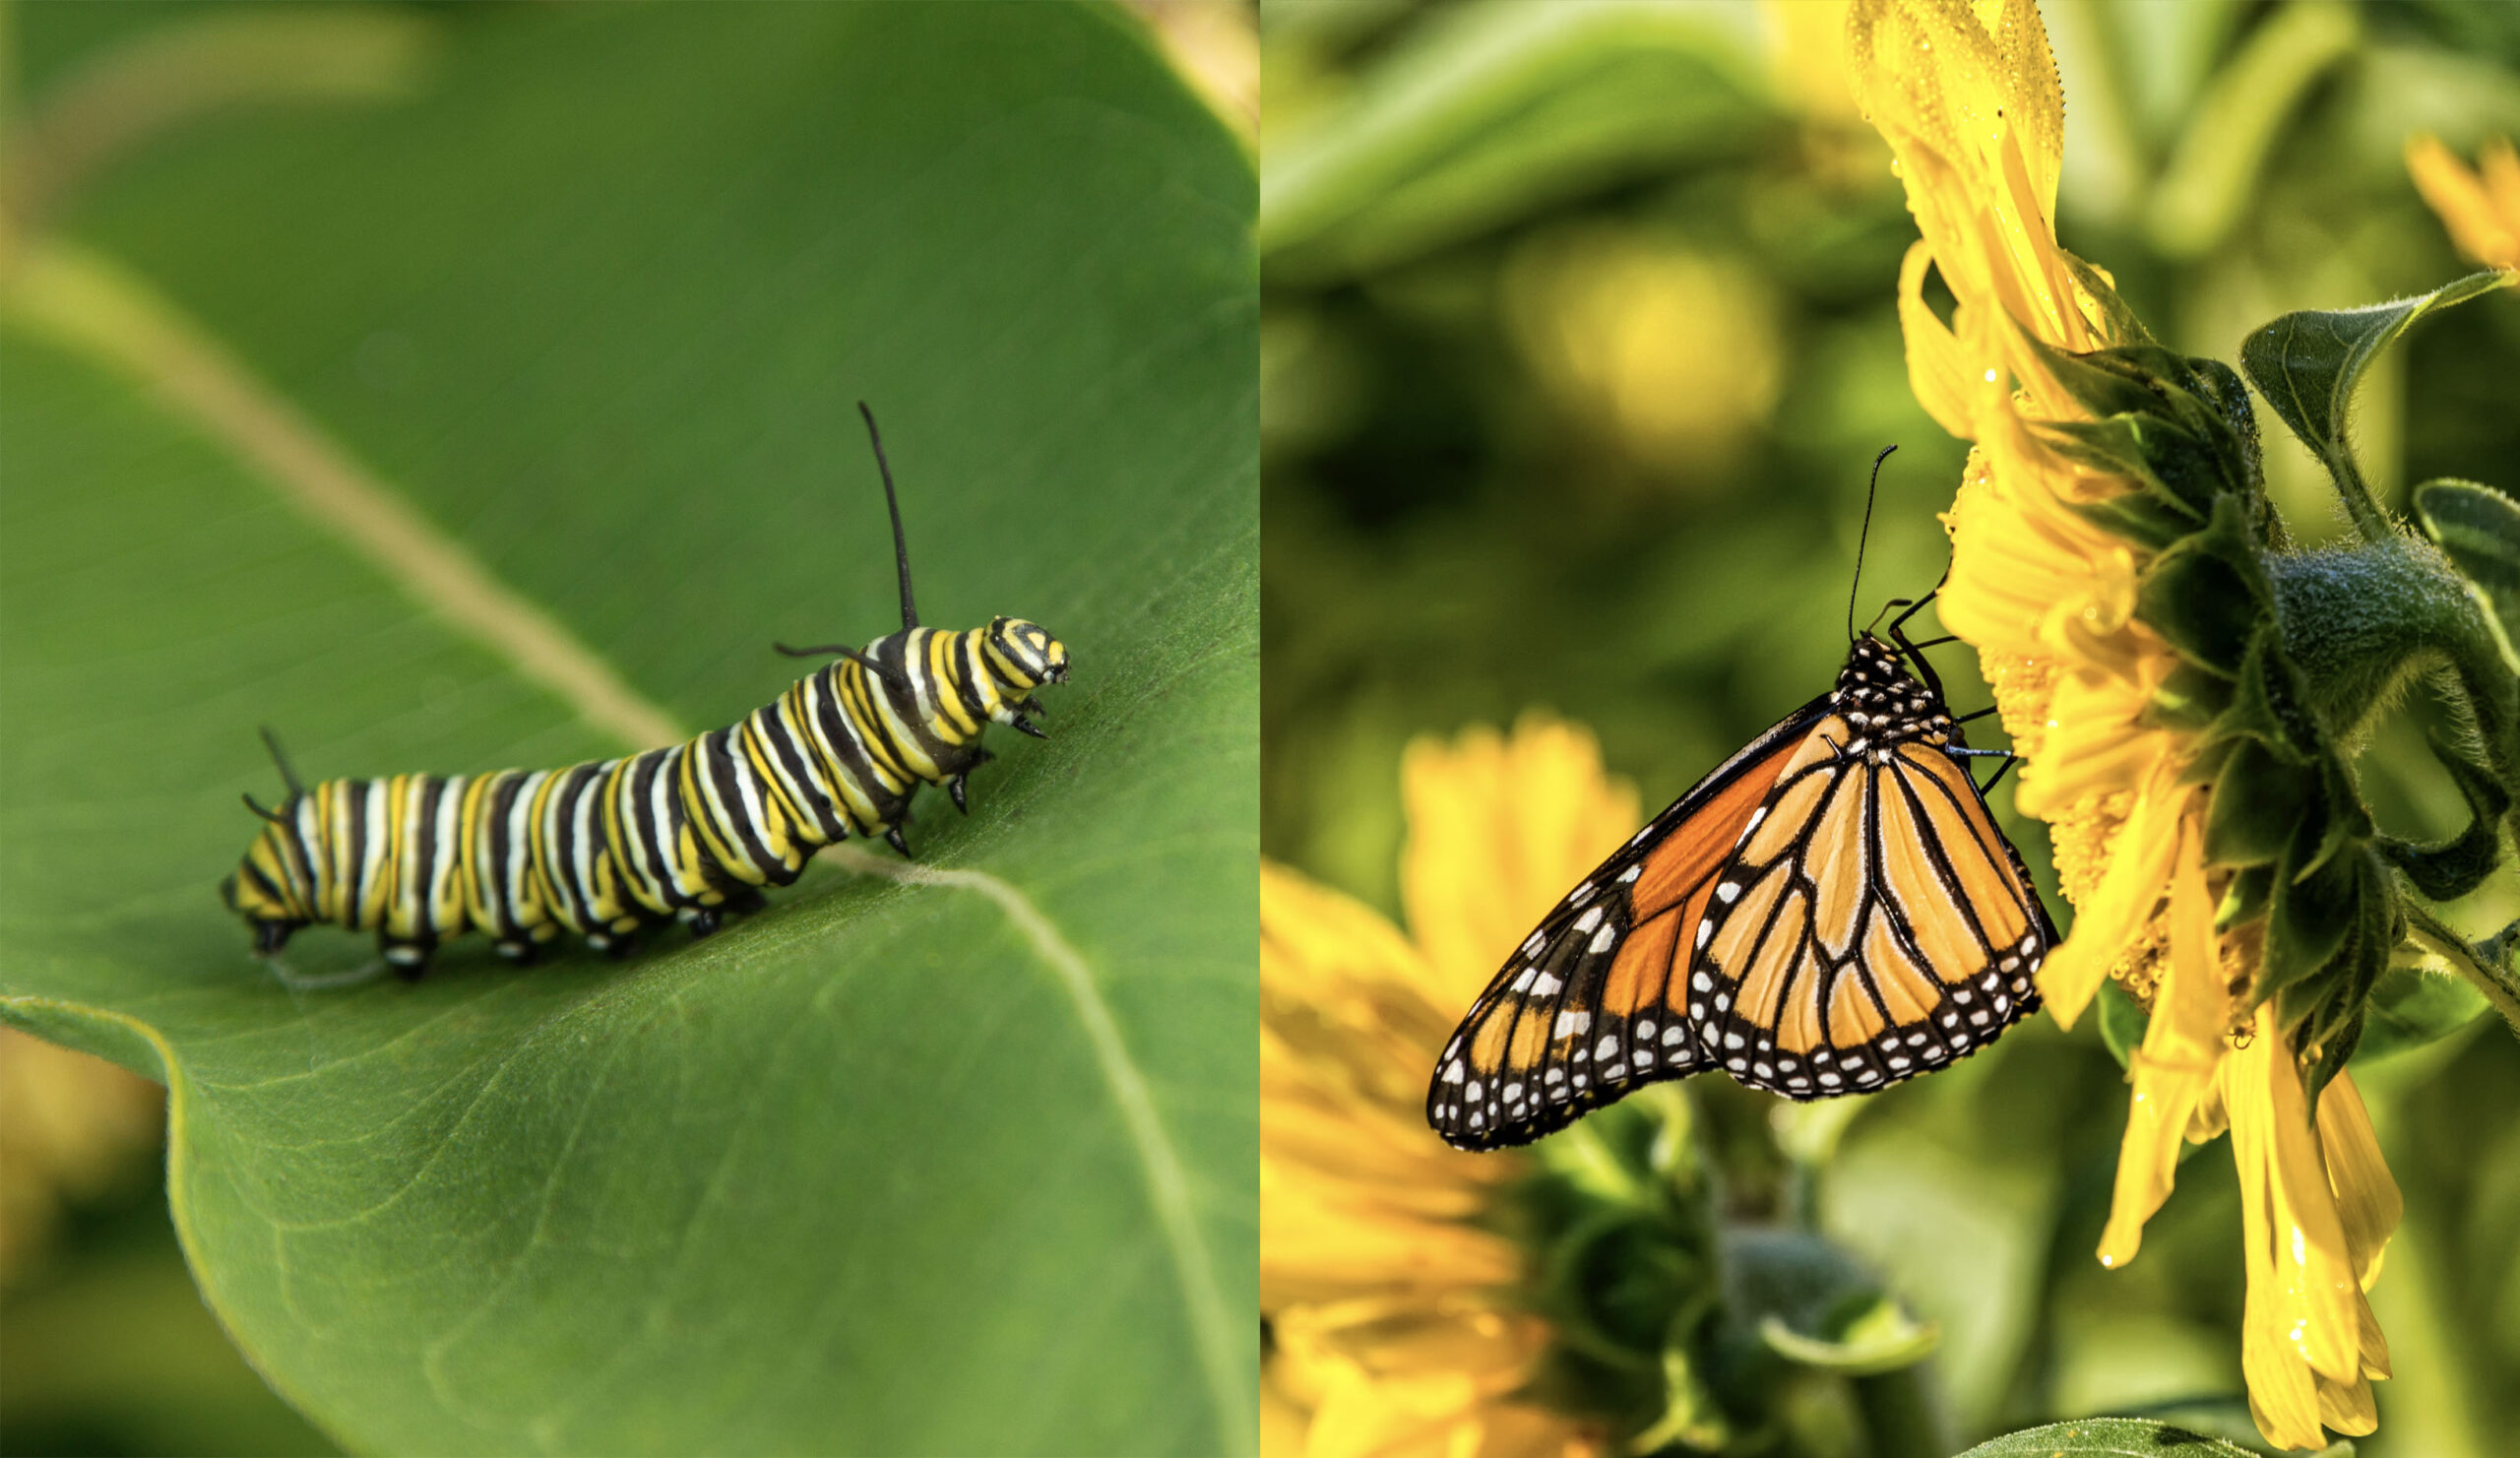 A monarch caterpillar alongside a butterfly, to illustrate how the pandemic has changed us